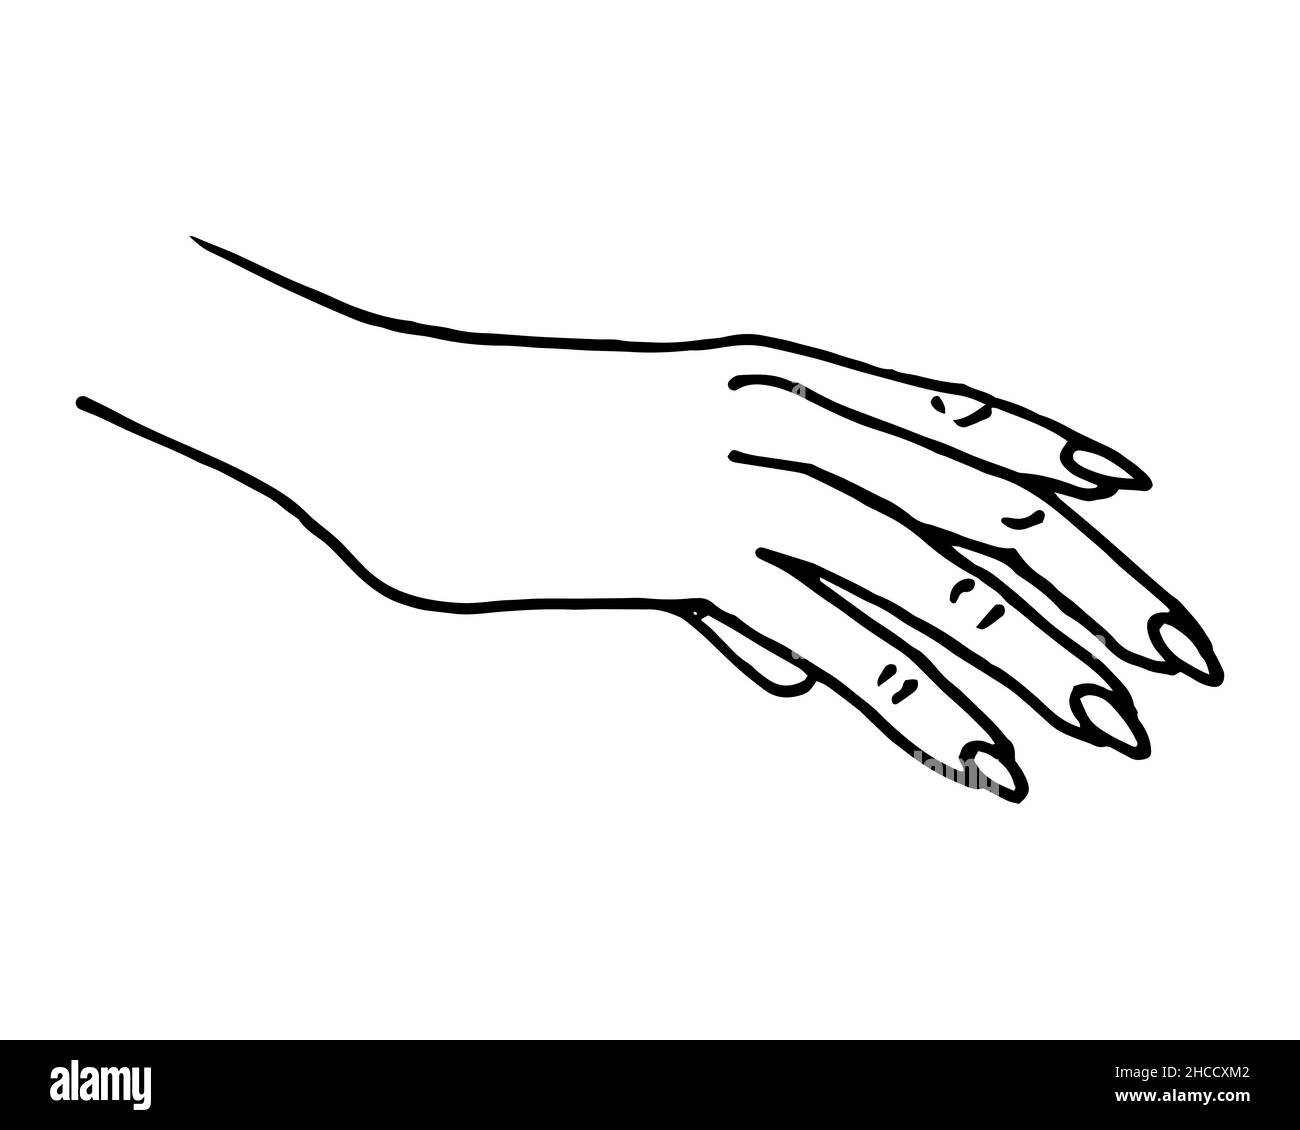 Female hand top right dorsum covering something sketch. Doodle line art vector isolated eps illustration Stock Vector